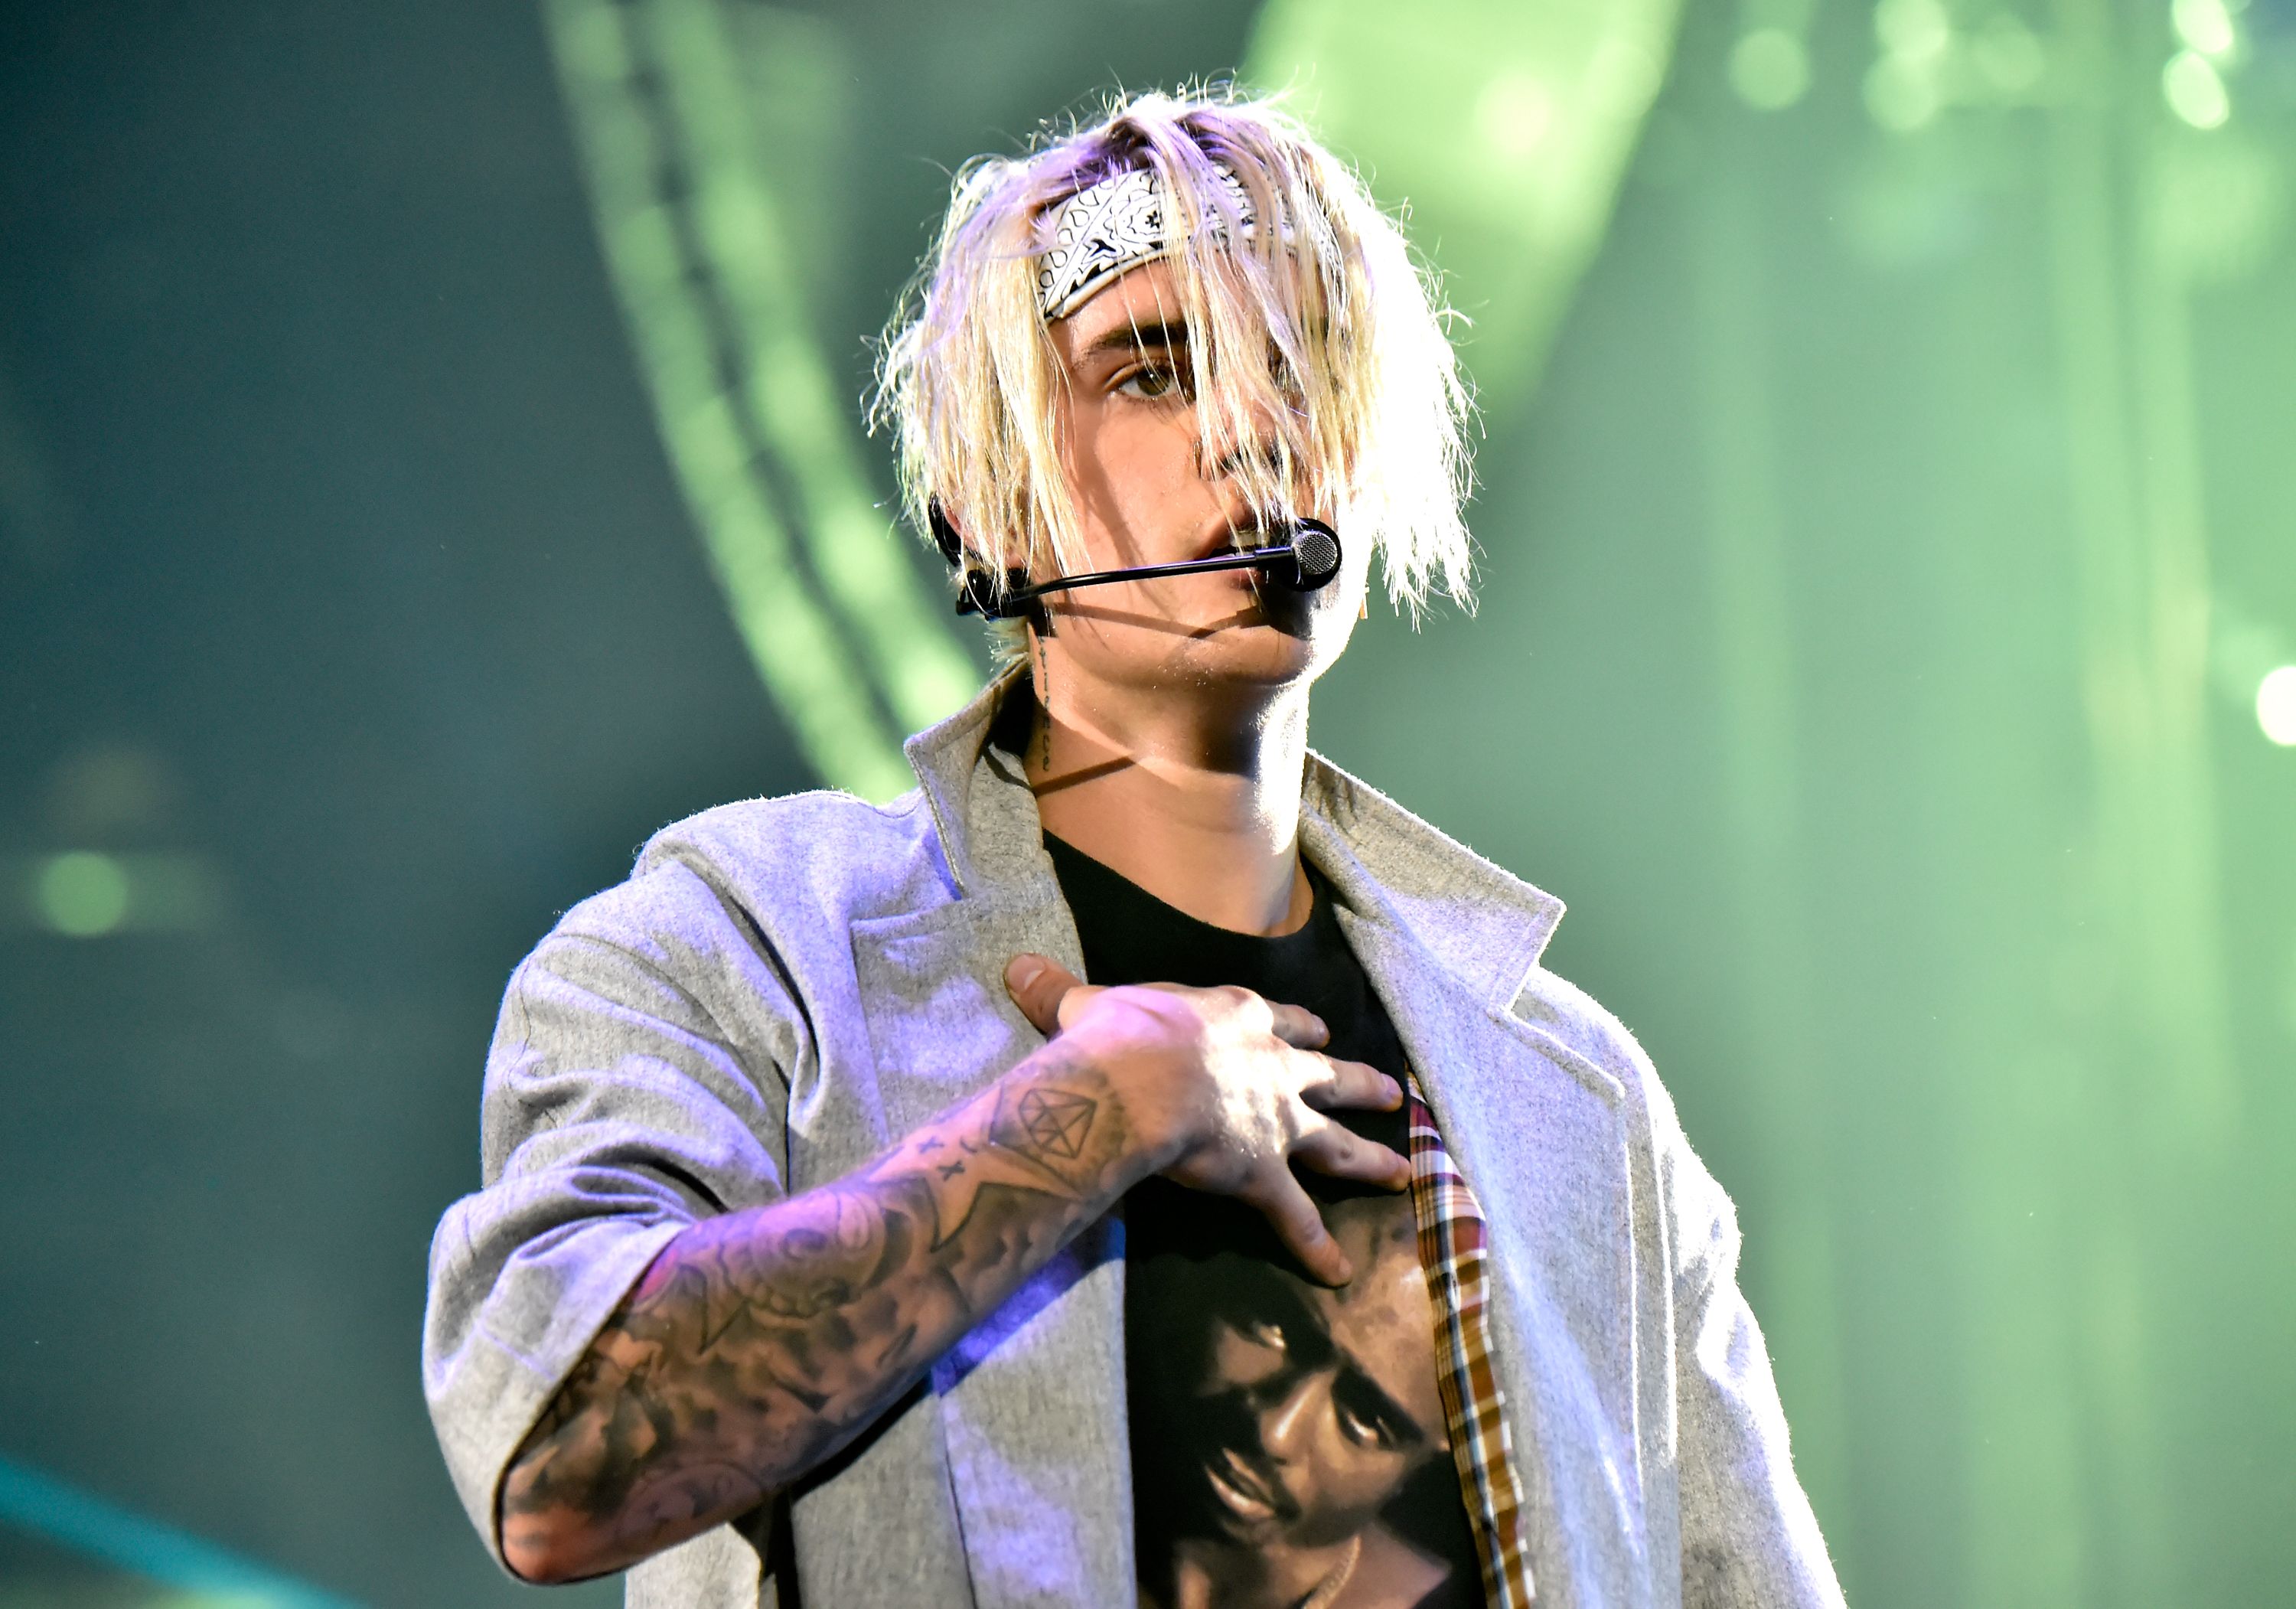 Justin Bieber Drops 'Where Are U Now' Song!, Justin Bieber, Music